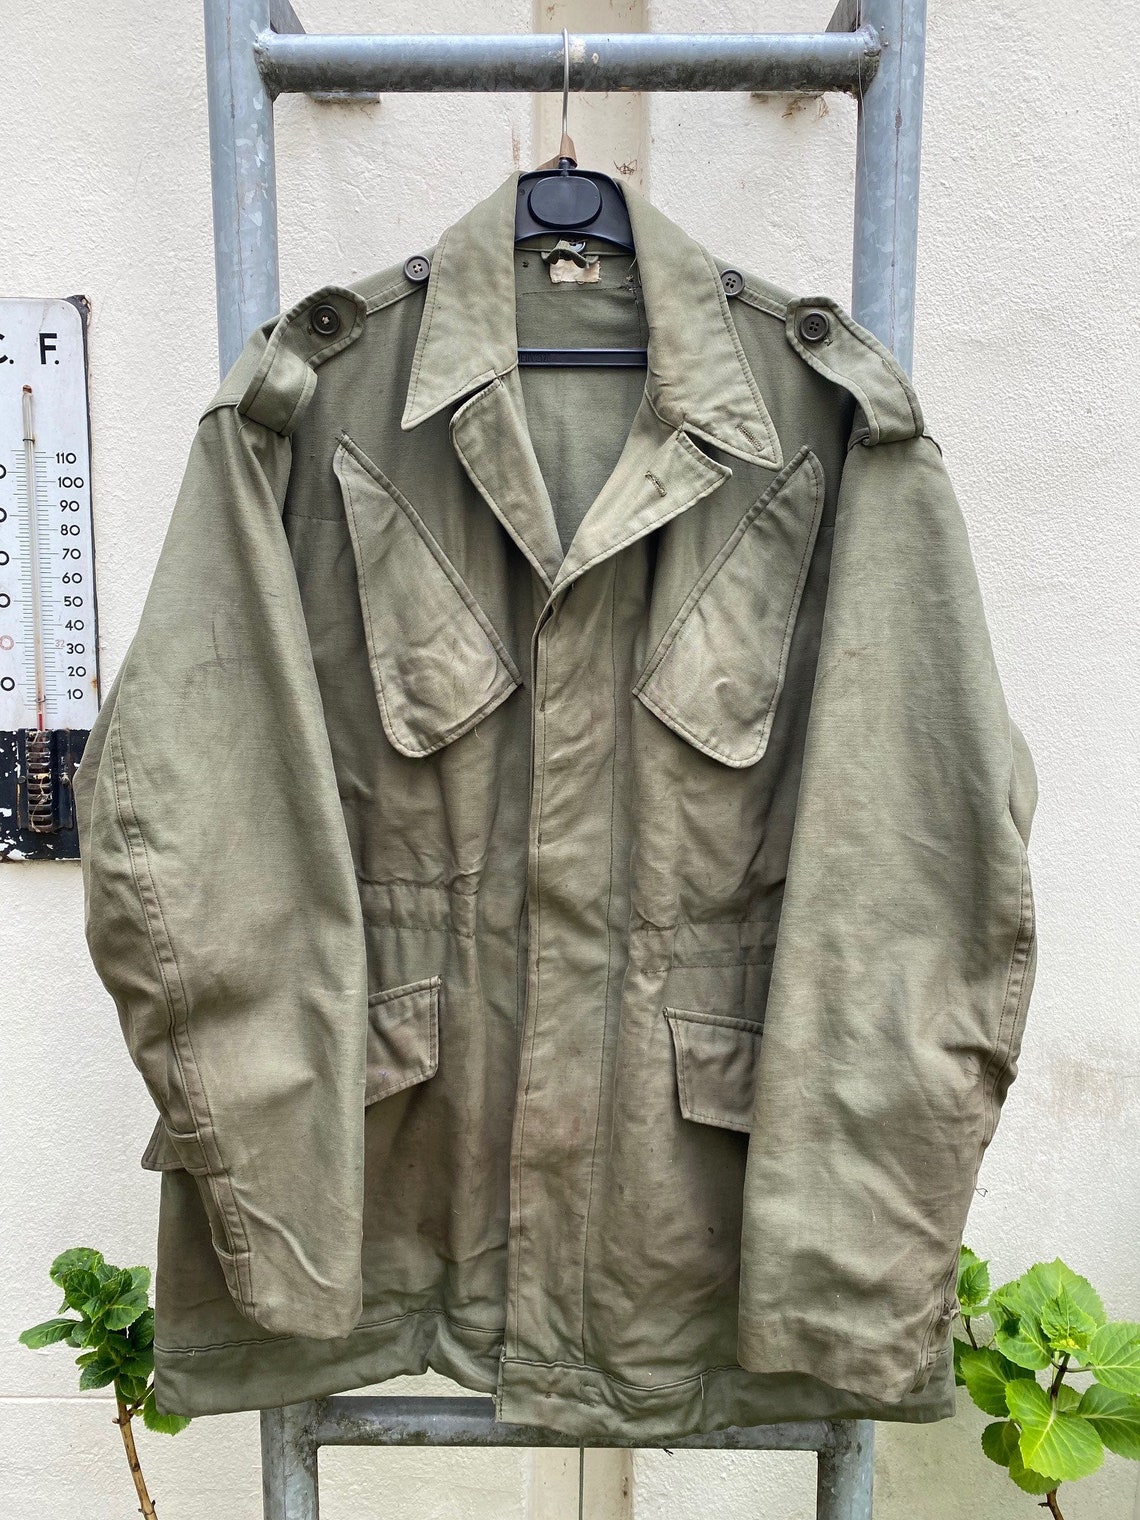 Vintage 60s: Dutch Military jacket fades & stains waxed | Etsy